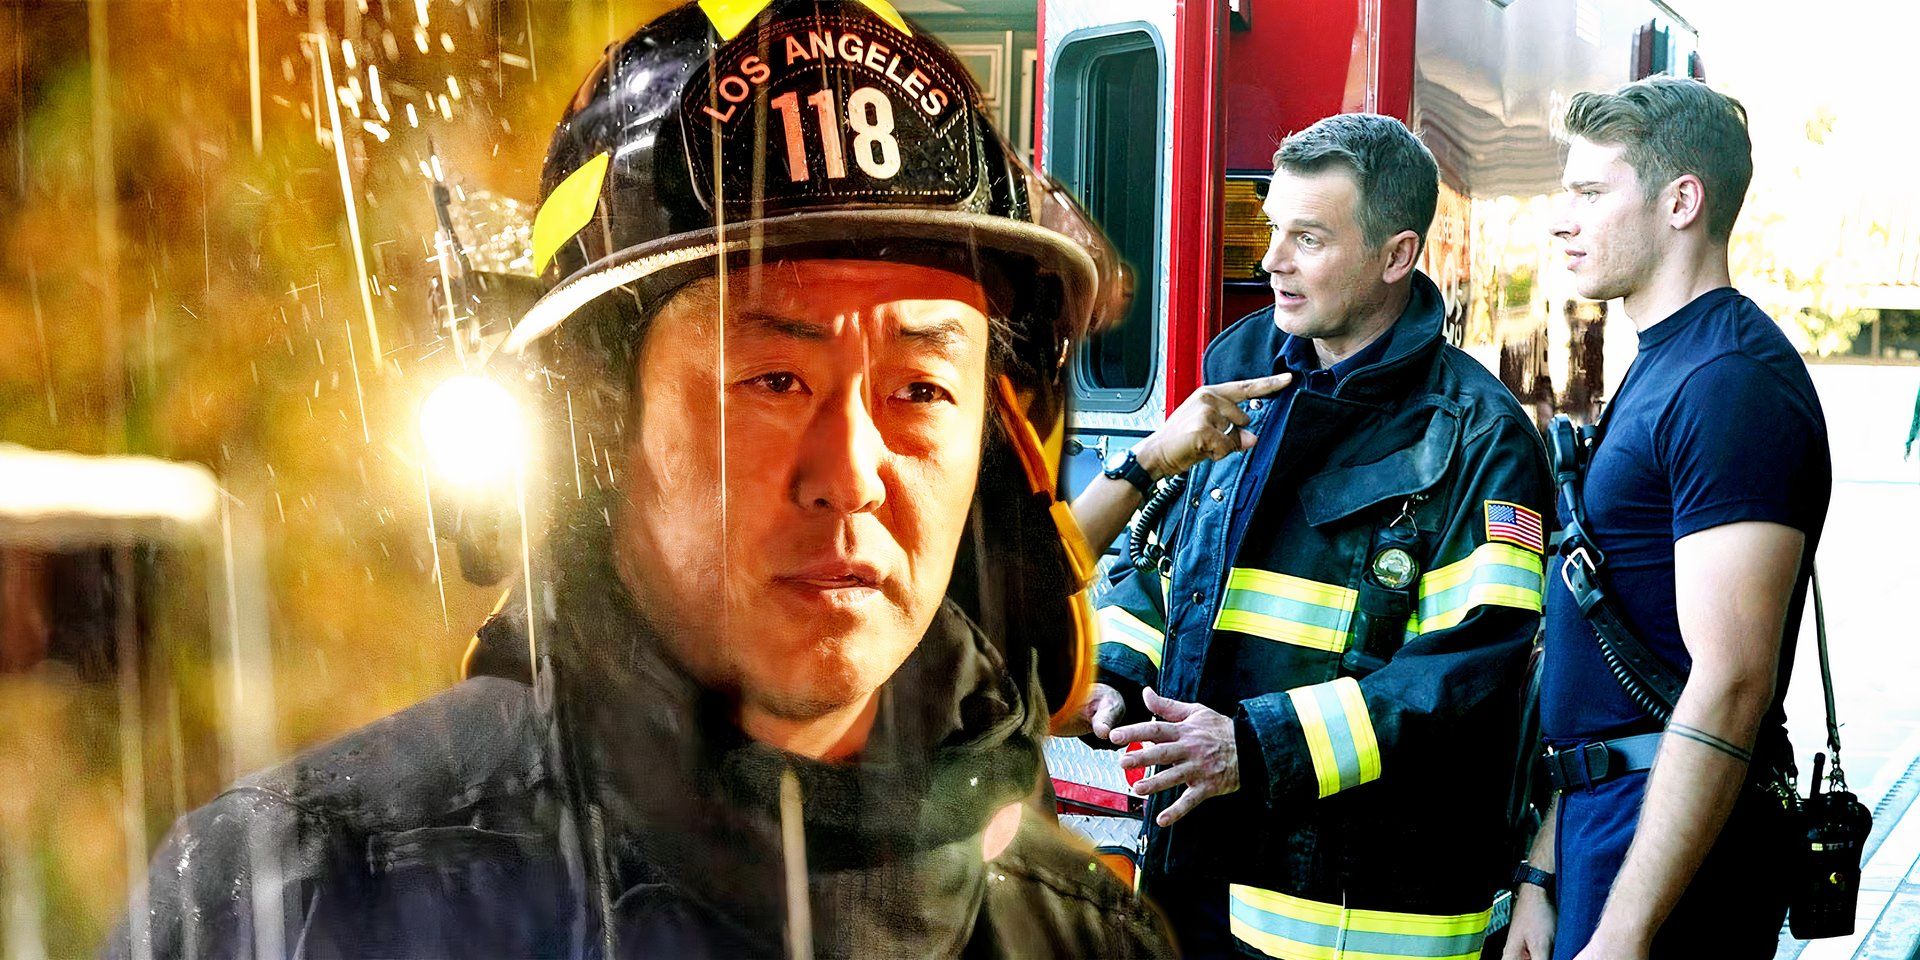 Kenneth Choi as Chimney in his work gear in a scene from 9-1-1 while two other characters are meeting a police officer